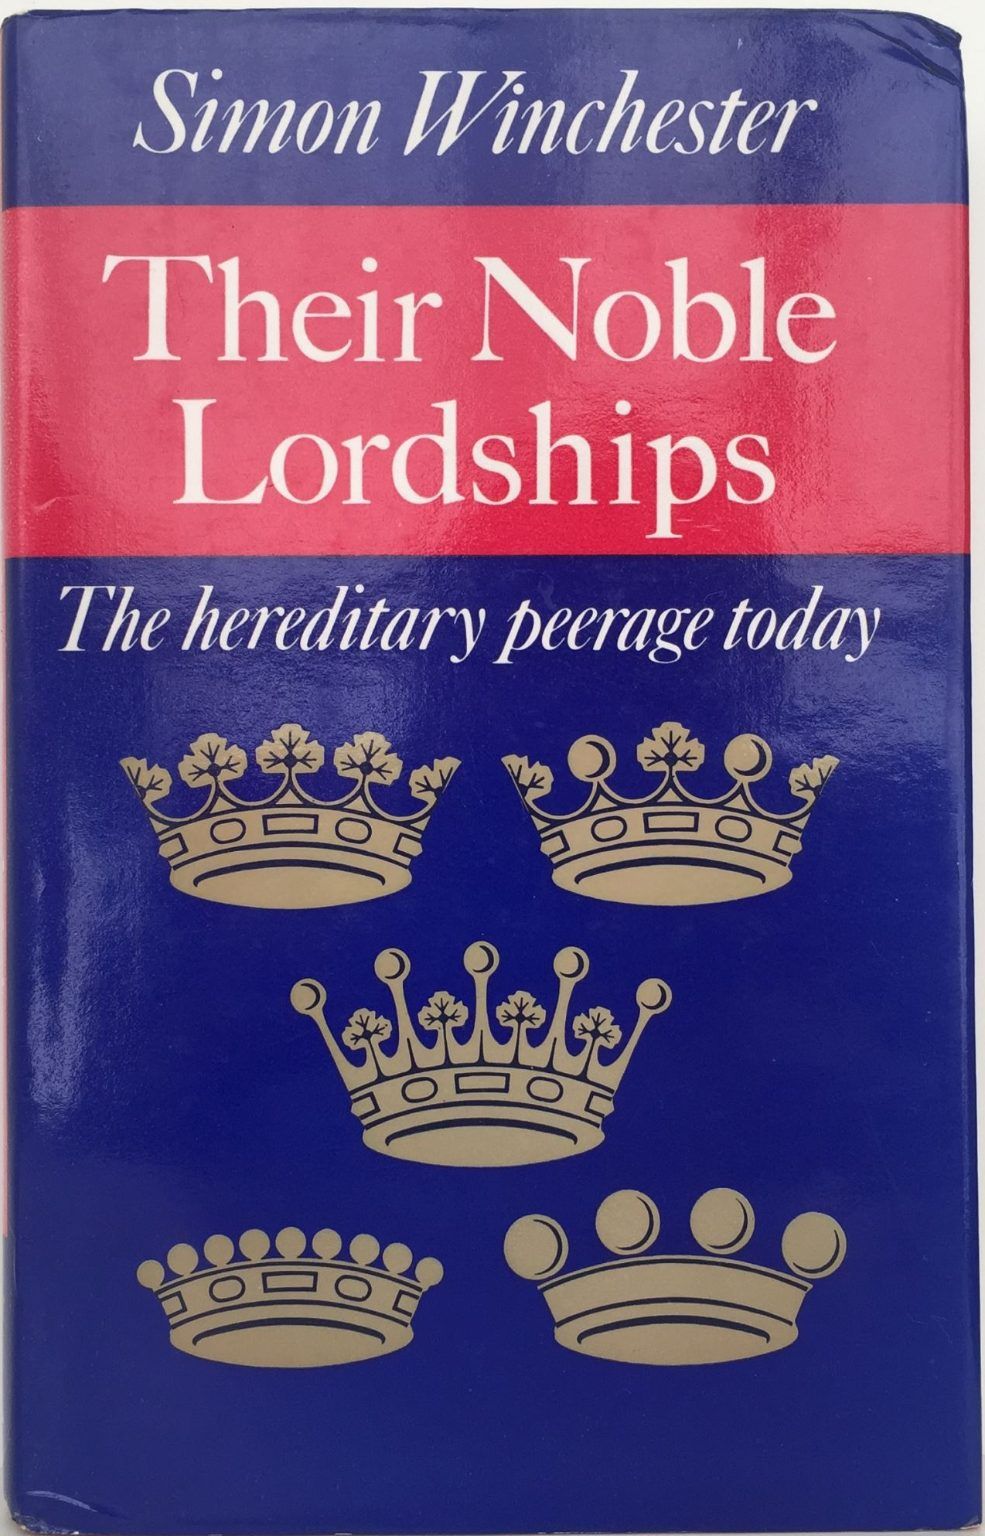 THEIR NOBLE LORDSHIPS: The Hereditary Peerage Today